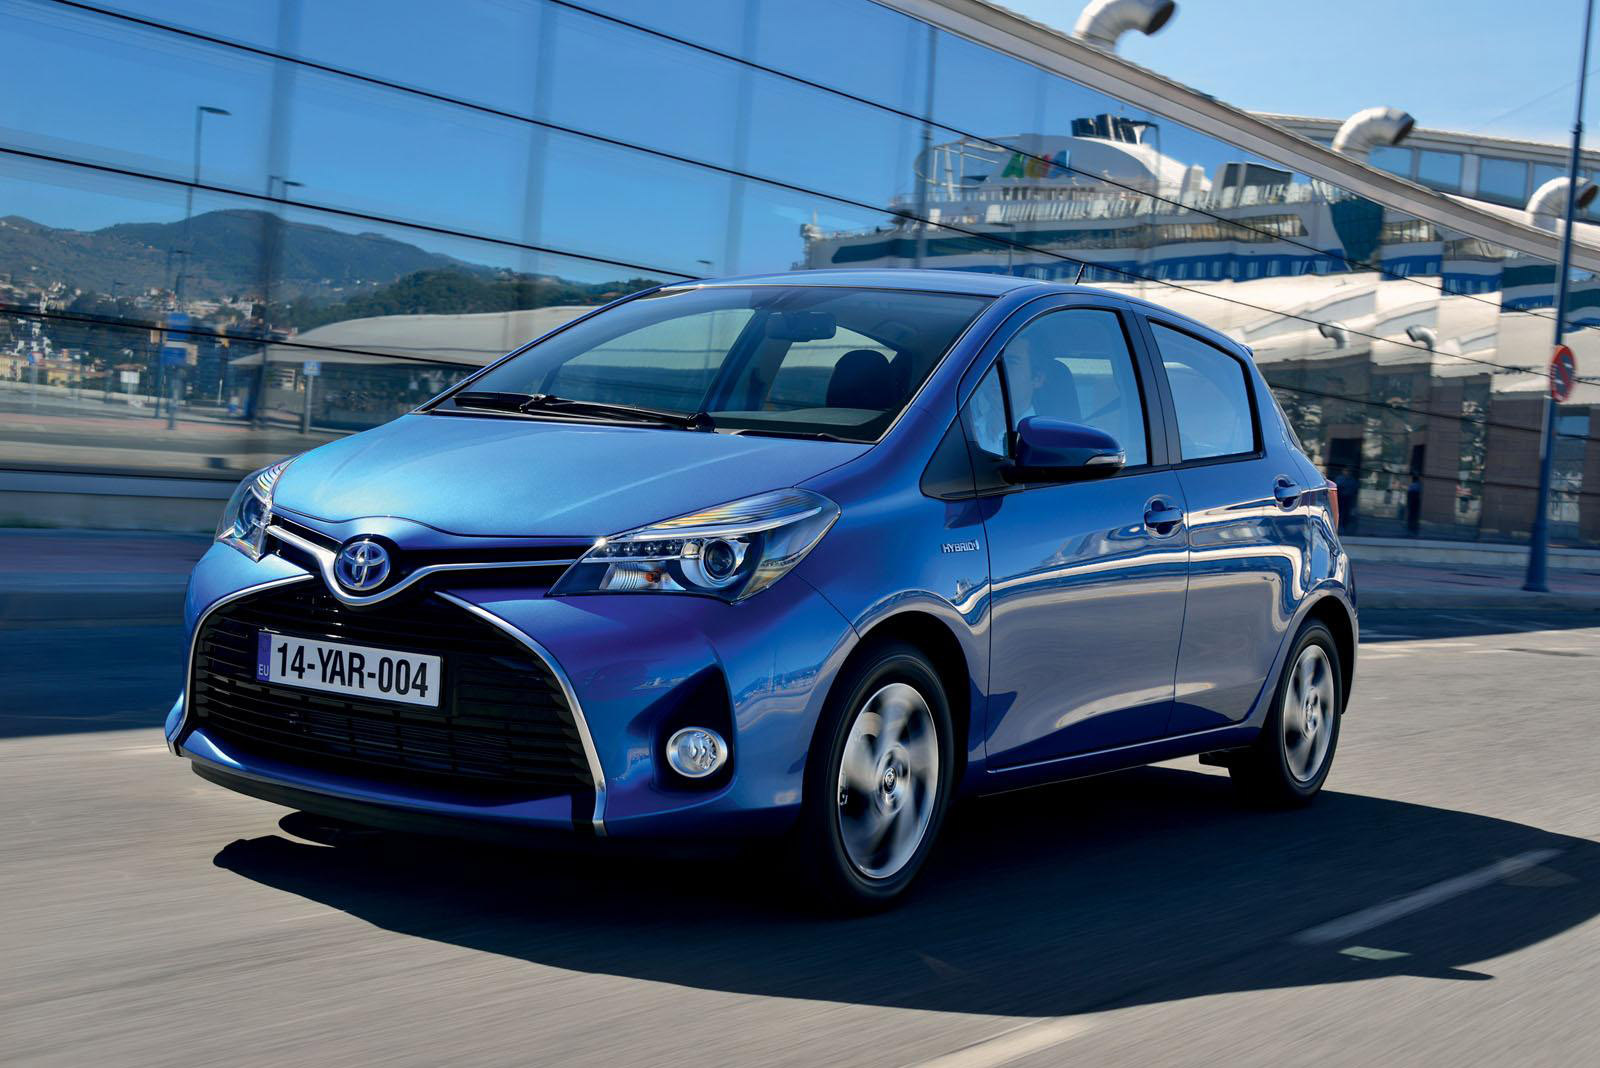 2015 Toyota Yaris - Full Details and Pictures.